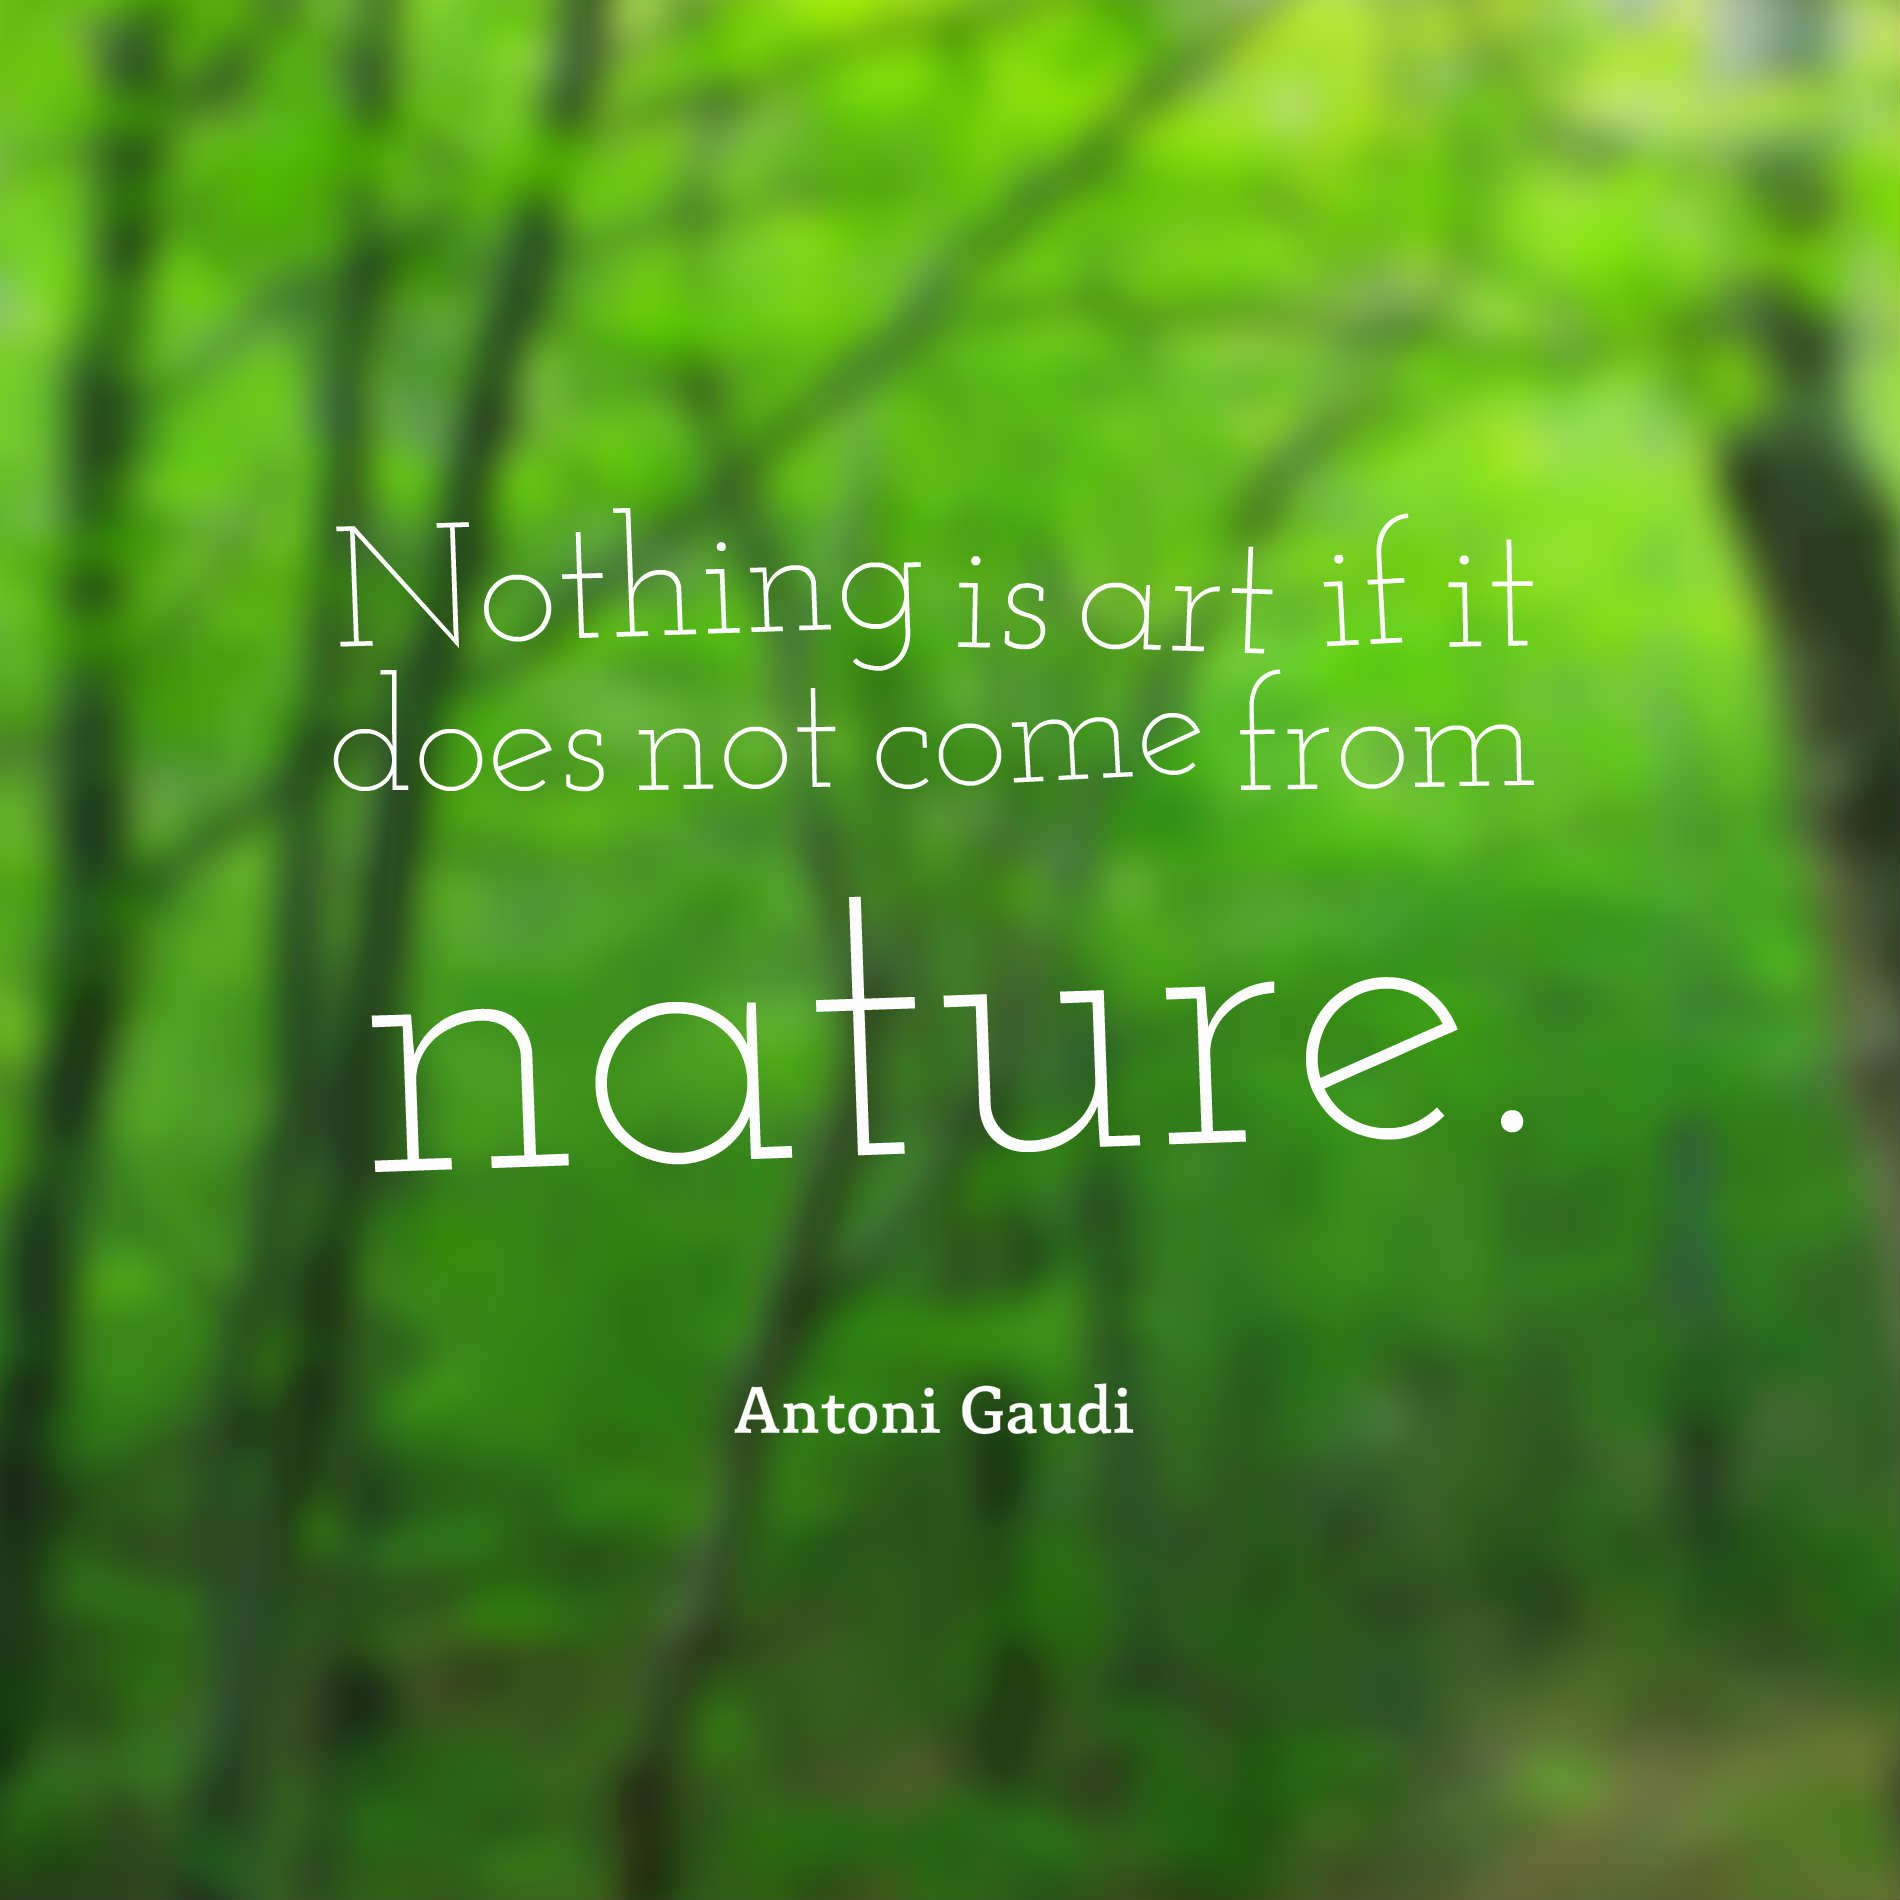 Nothing is art if it does not come from nature.